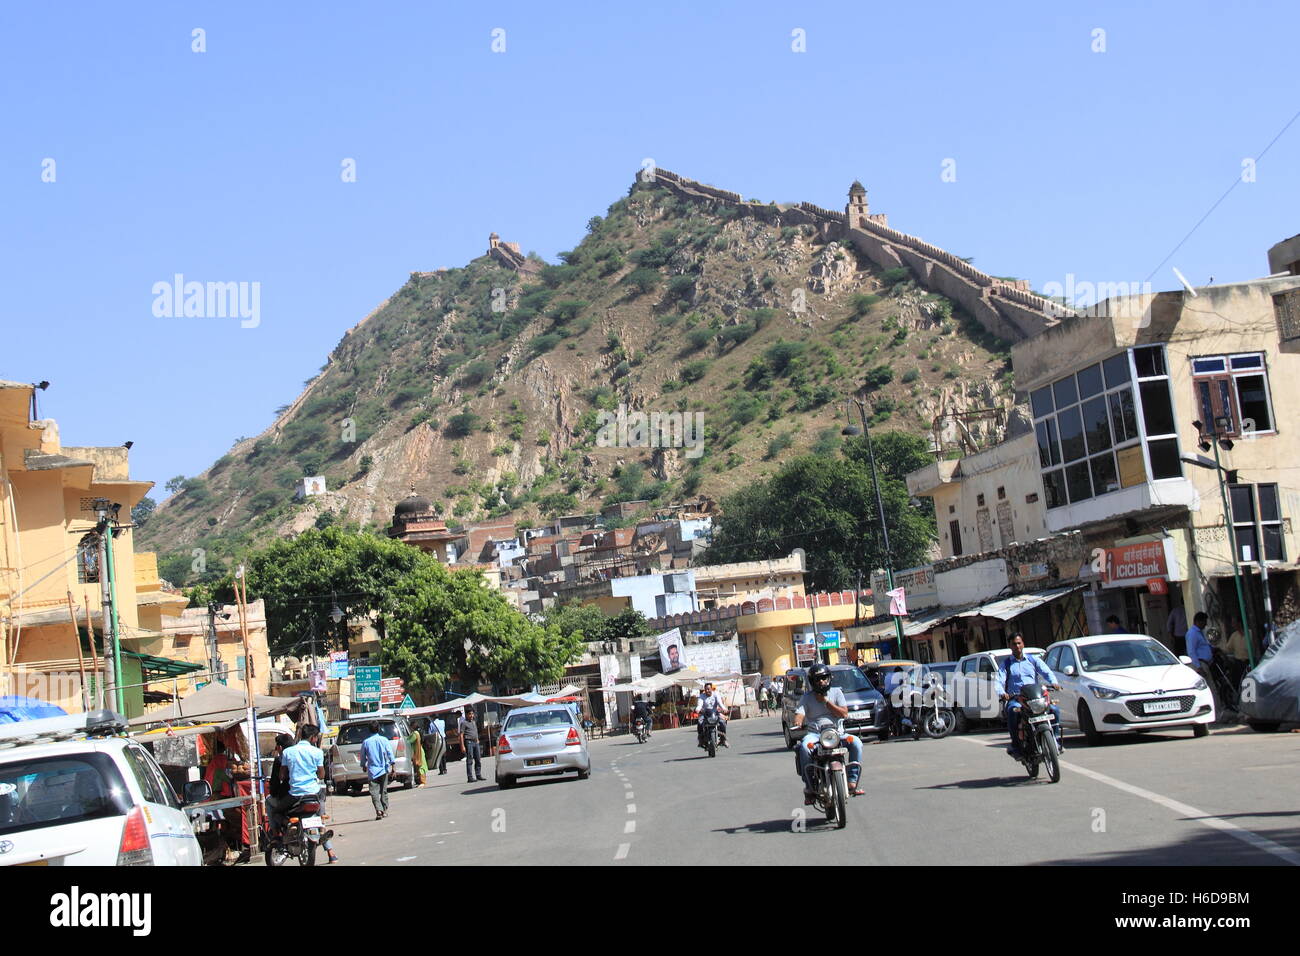 Amer, Jaipur, Rajasthan, India, Indian subcontinent, South Asia Stock Photo